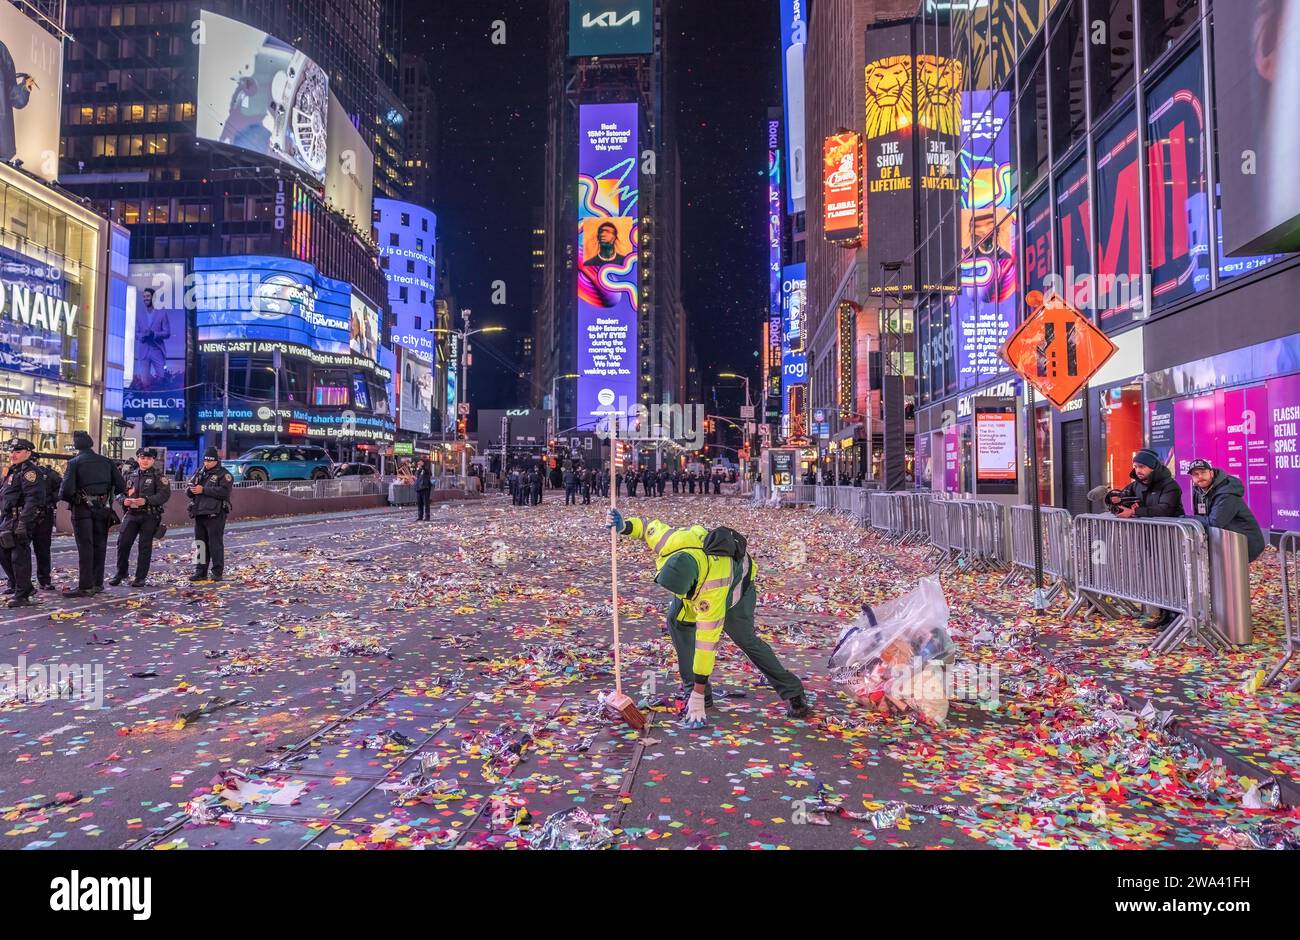 NEW YORK, N.Y. – January 1, 2024: A New York City sanitation worker clears debris in Times Square following a New Year’s Eve celebration. Stock Photo